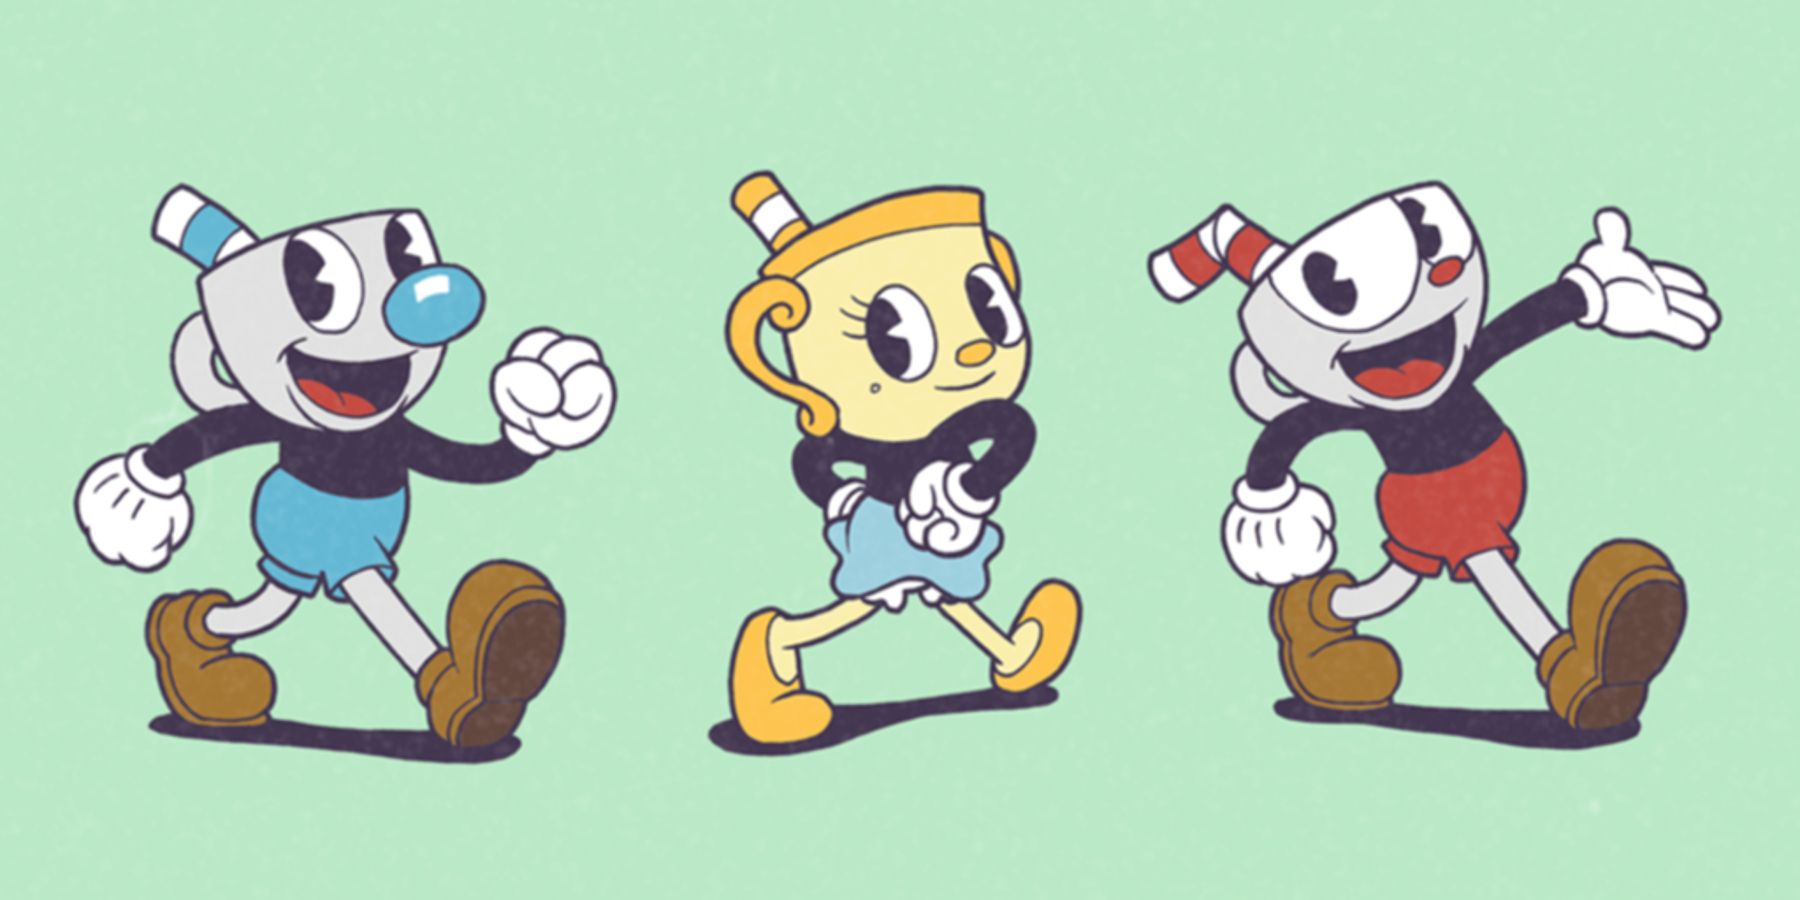 All 3 playable Cuphead characters in a row